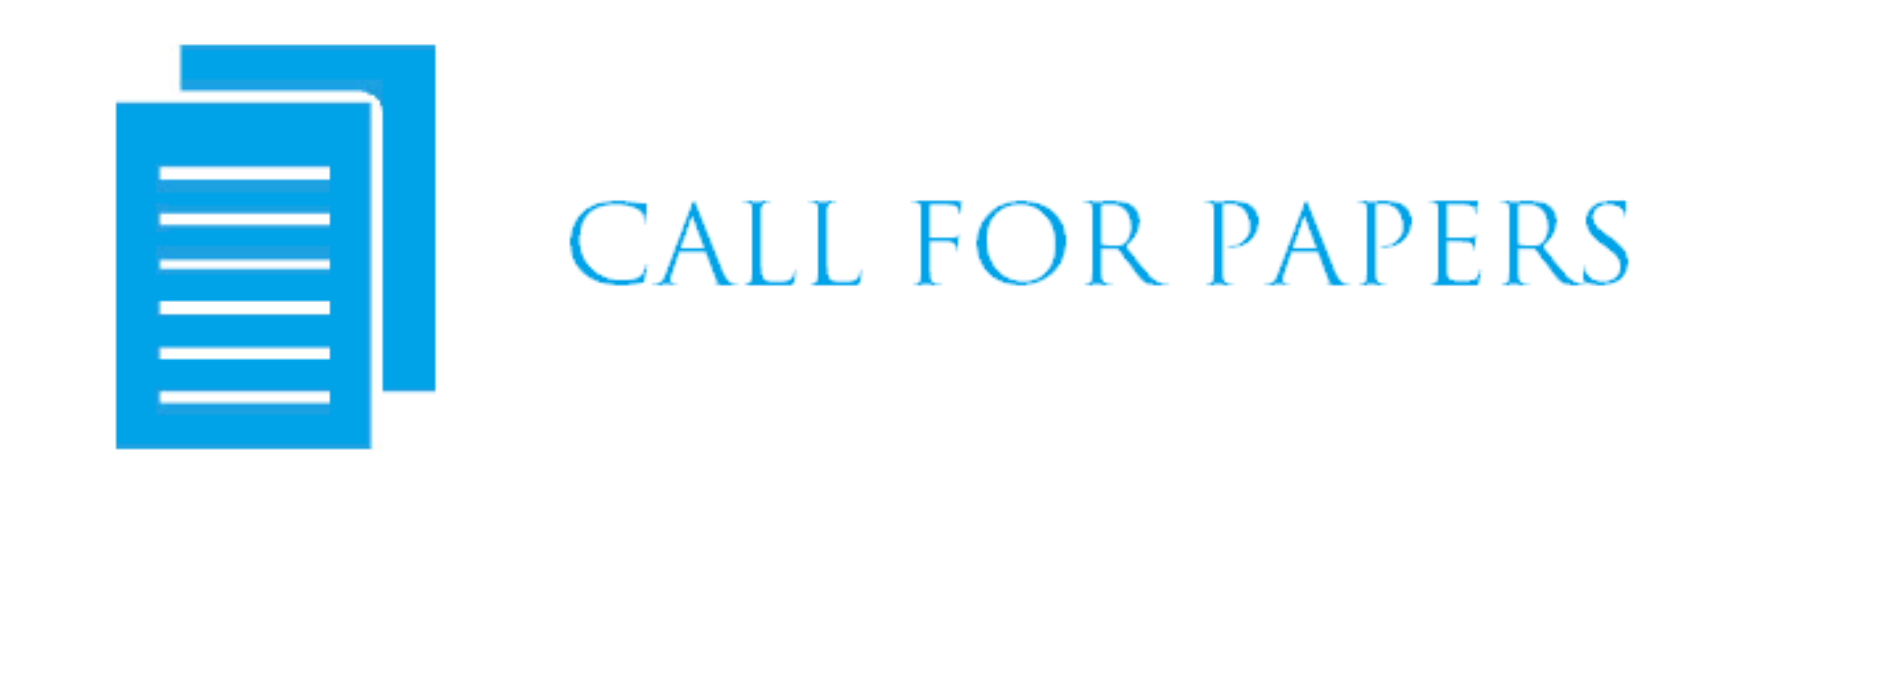 CFP: Annual meeting of the Finnish Society for History and Philosophy of Education (FSHPE). June 11-12 2019 Oulu, Finland.